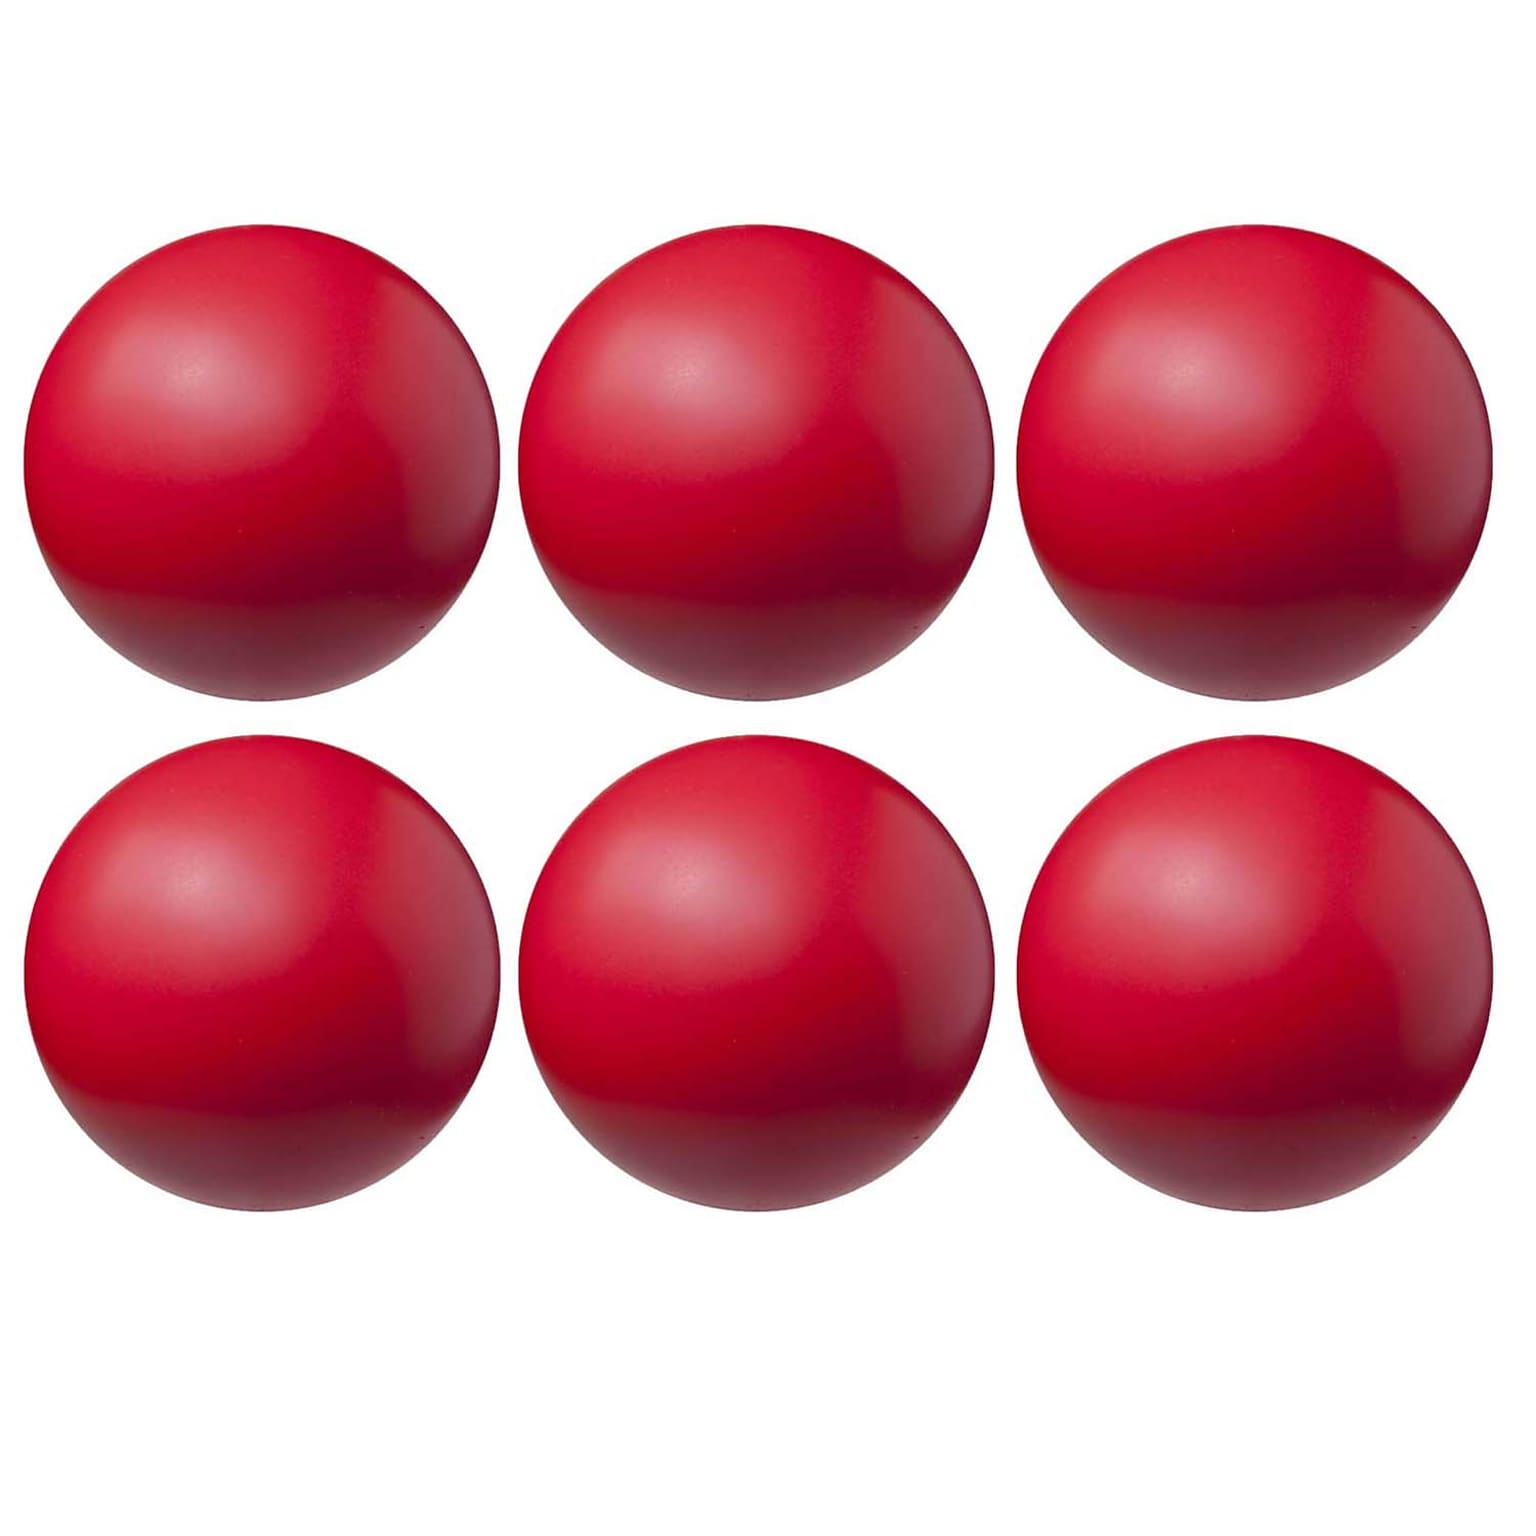 Champion Sports High Density Coated 4 Foam Ball, Red, Pack of 6 (CHSHD4-6)